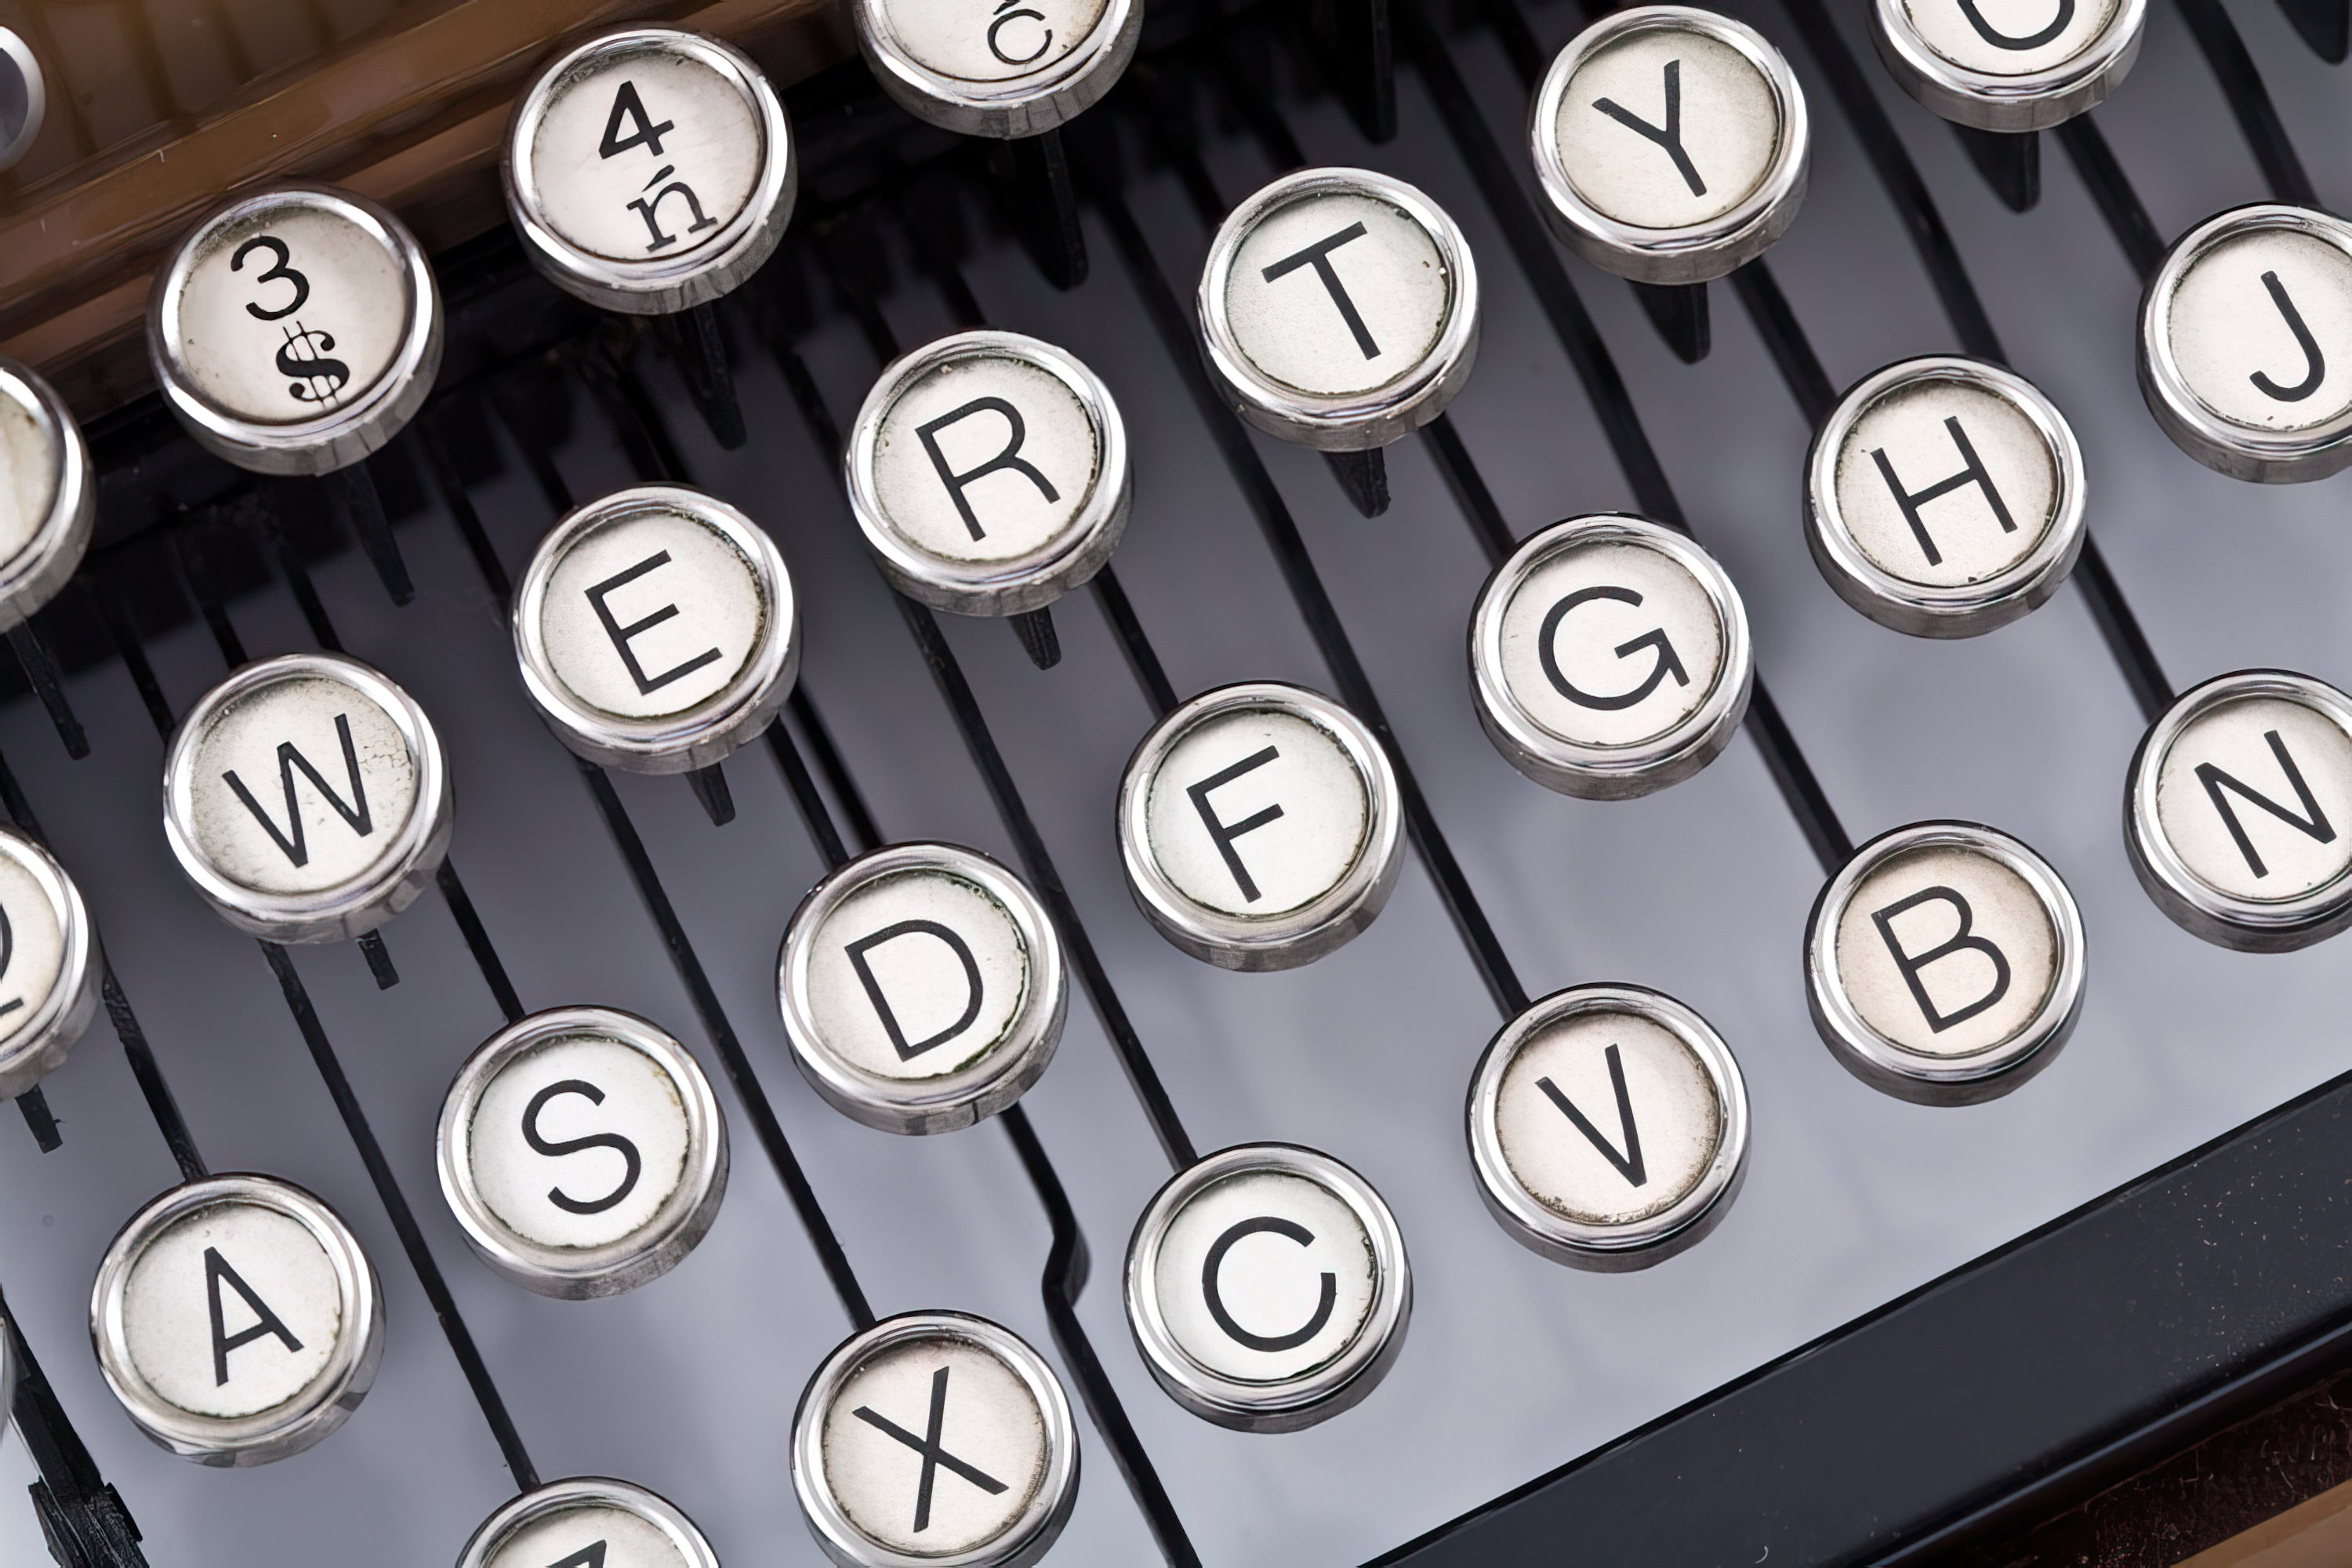 2015 Adapted & True Story Screenplay Competition - Image of Typewriter Keys